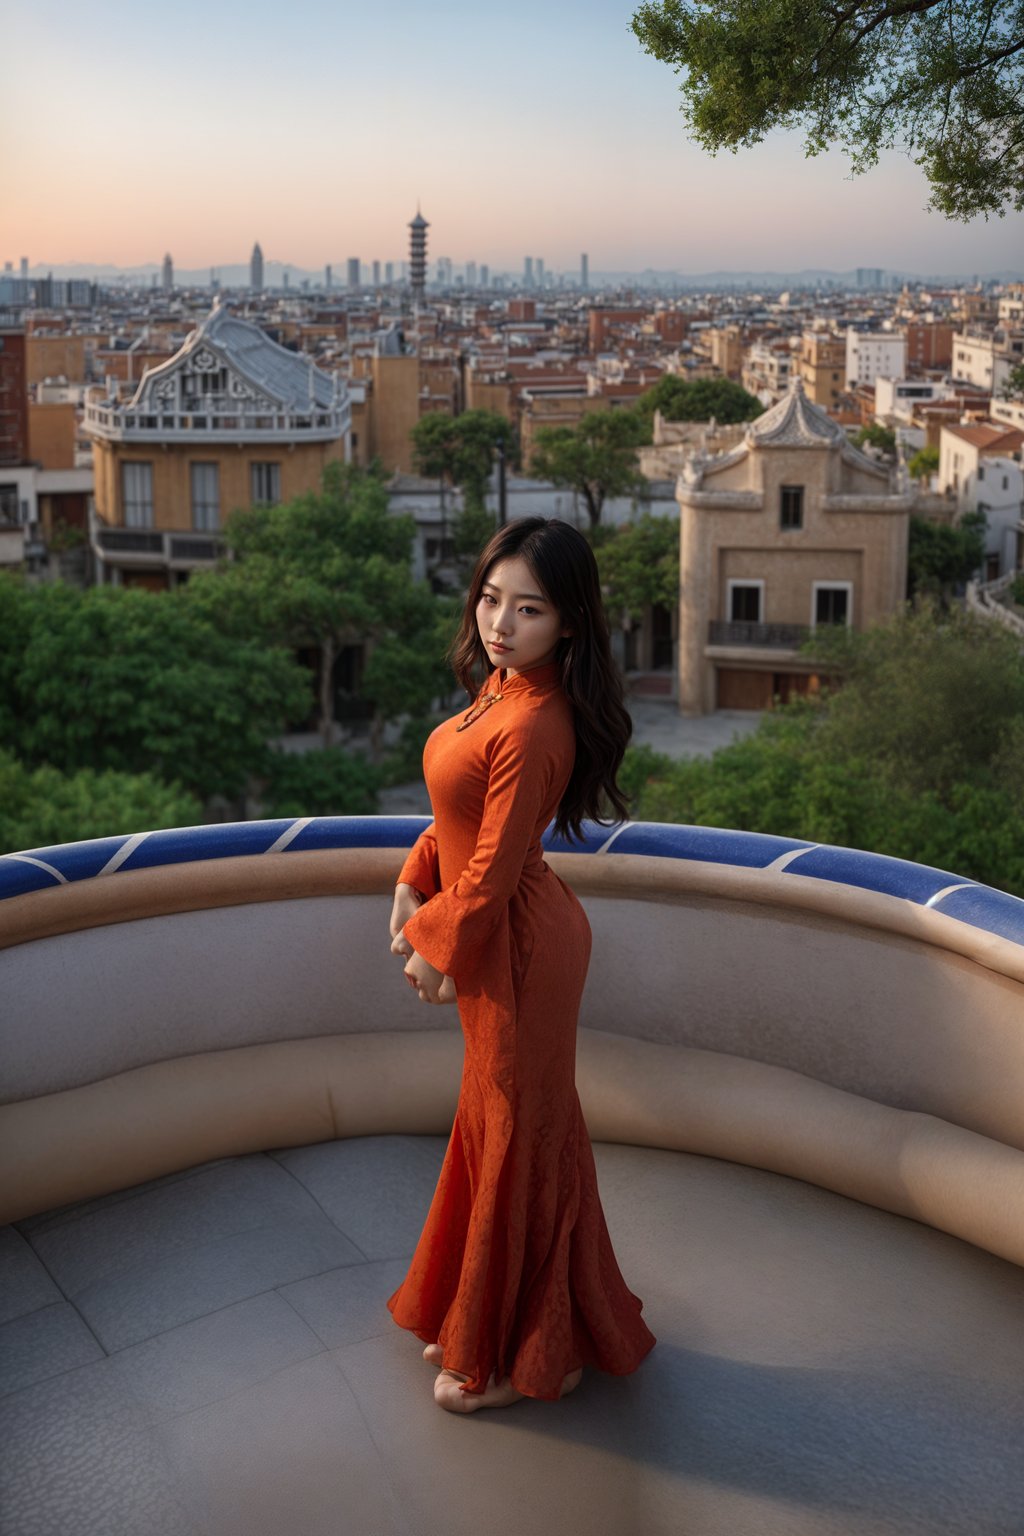 stylish and chic  woman in Barcelona wearing a flamenco-inspired dress/suit, Park Güell in the background